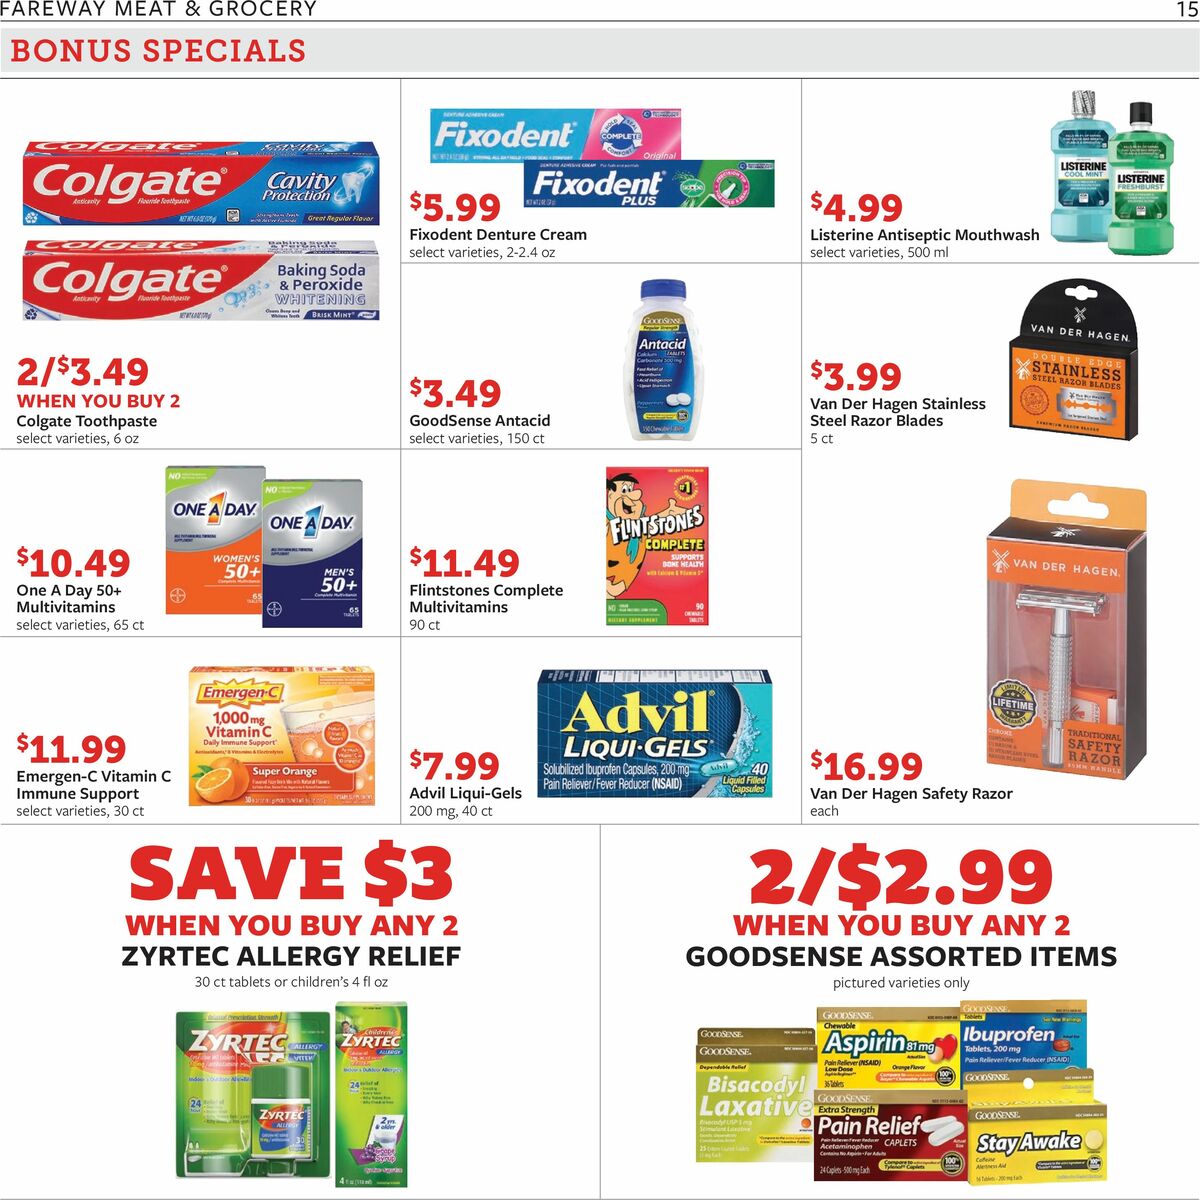 Fareway Weekly Ad from September 11